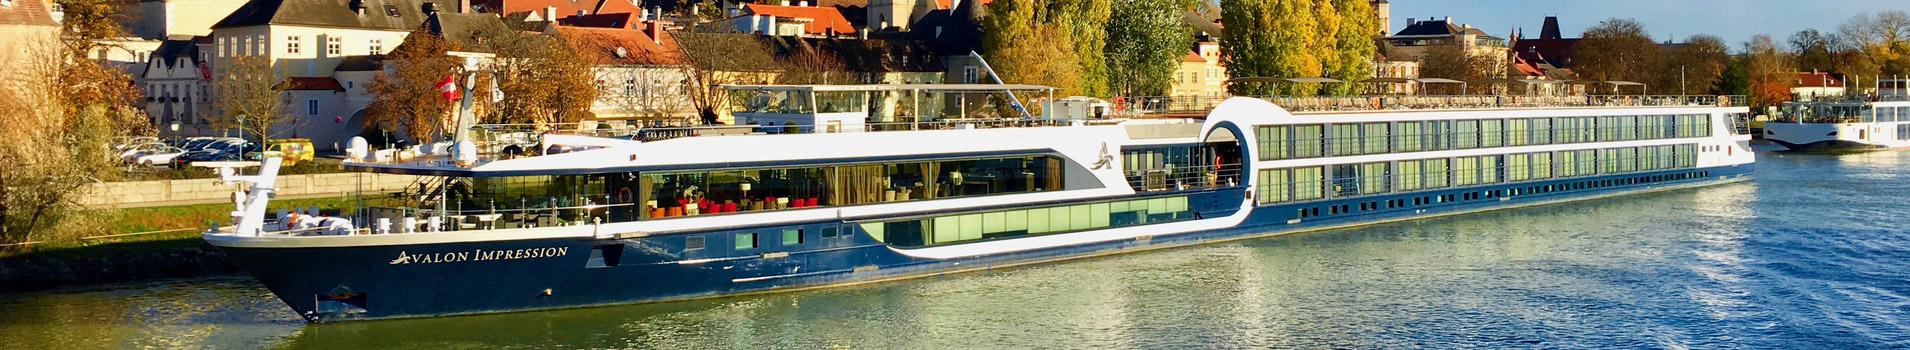 Top River Cruise Lines